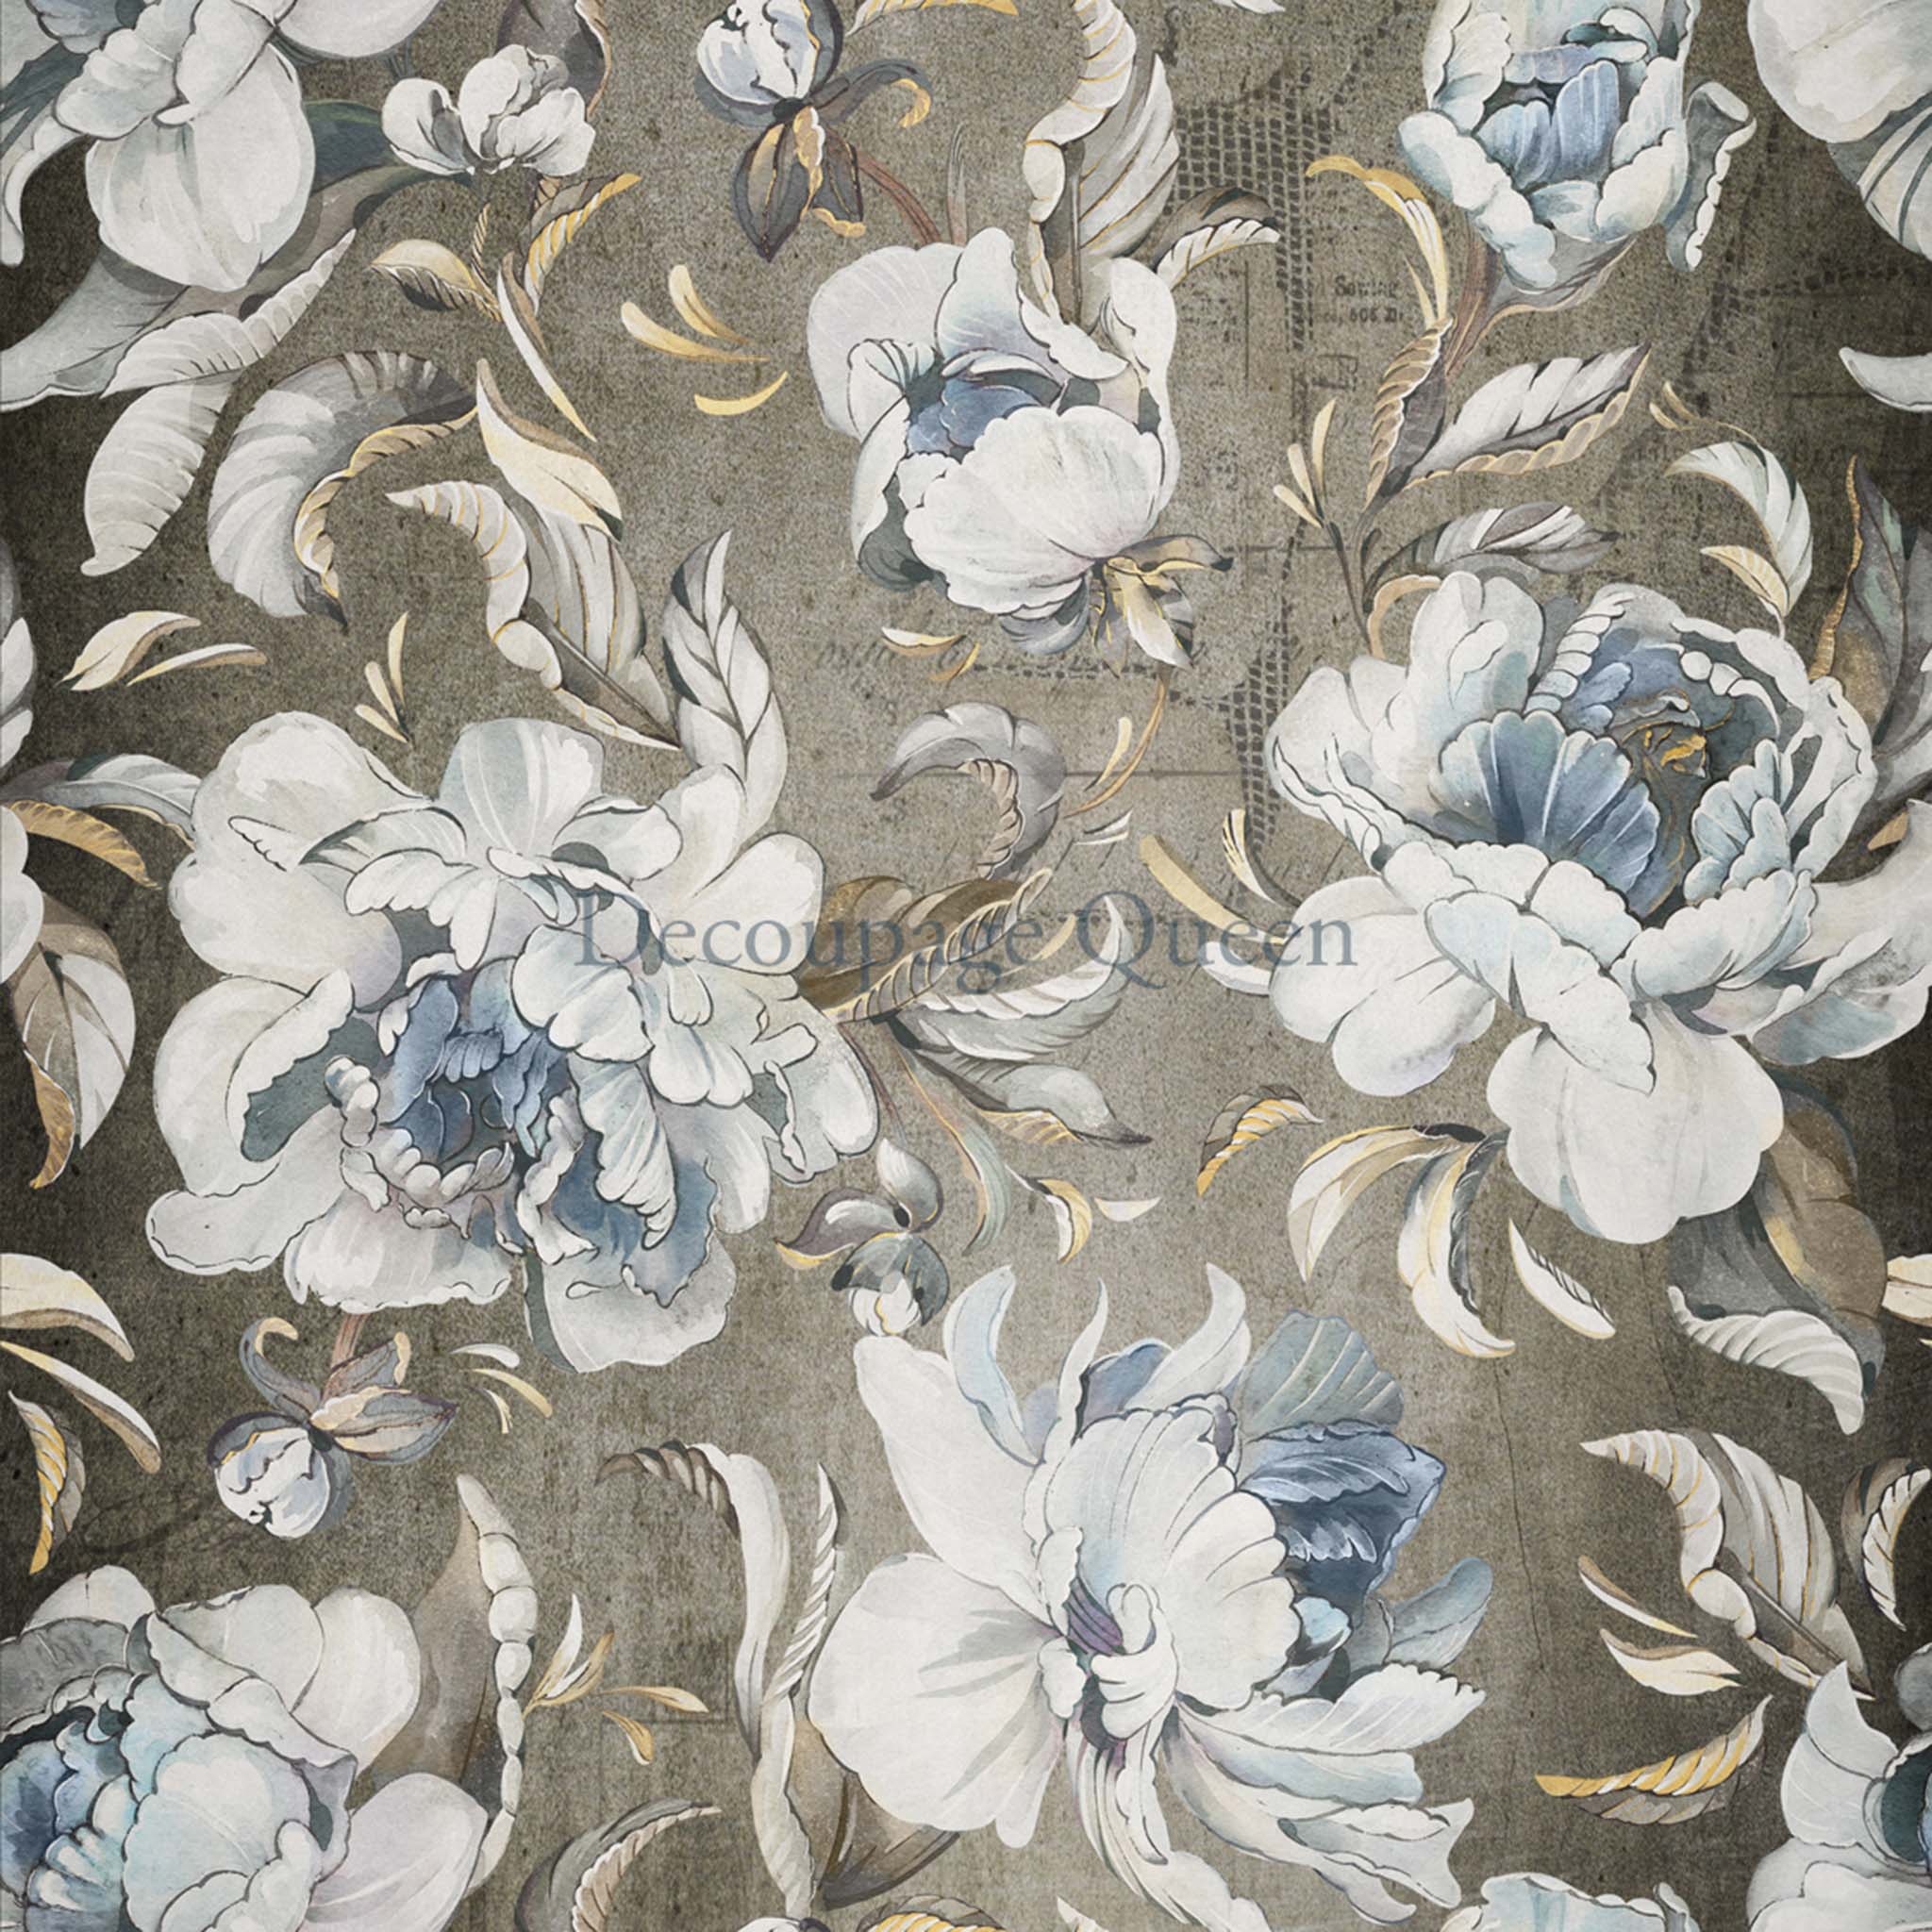 Close-up of an A0 rice paper that features a soft gray background, adorned with delicate white and blue flower designs.